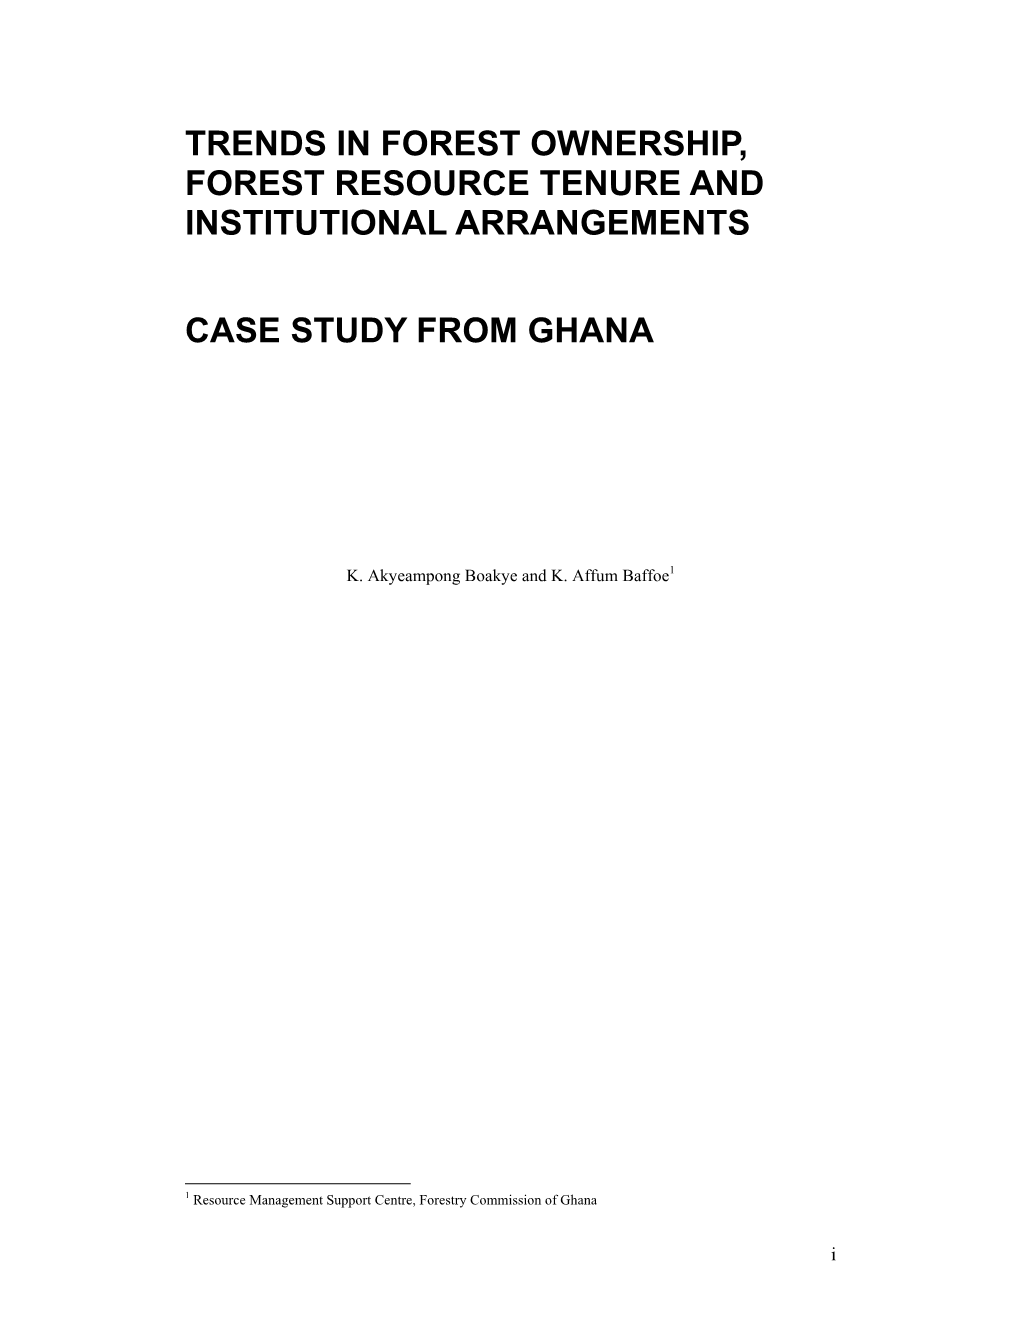 Tredns Inf Forest Ownership, Forest Resources Tenure and Institutional